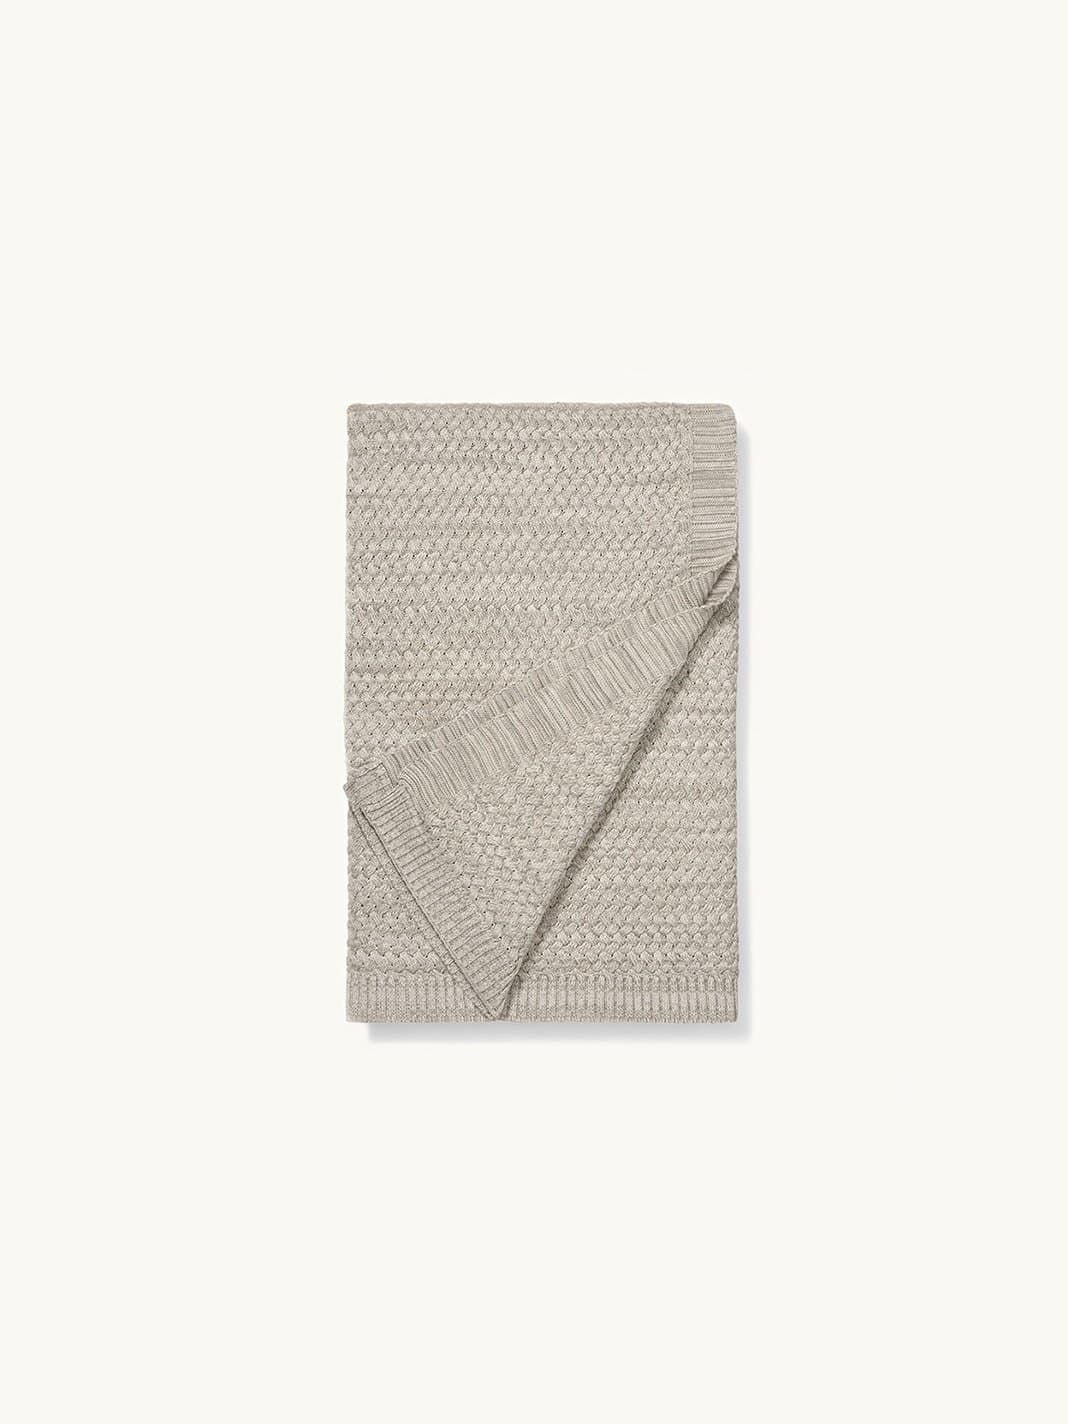 Sweater Knit Throw Blanket | Boll & Branch